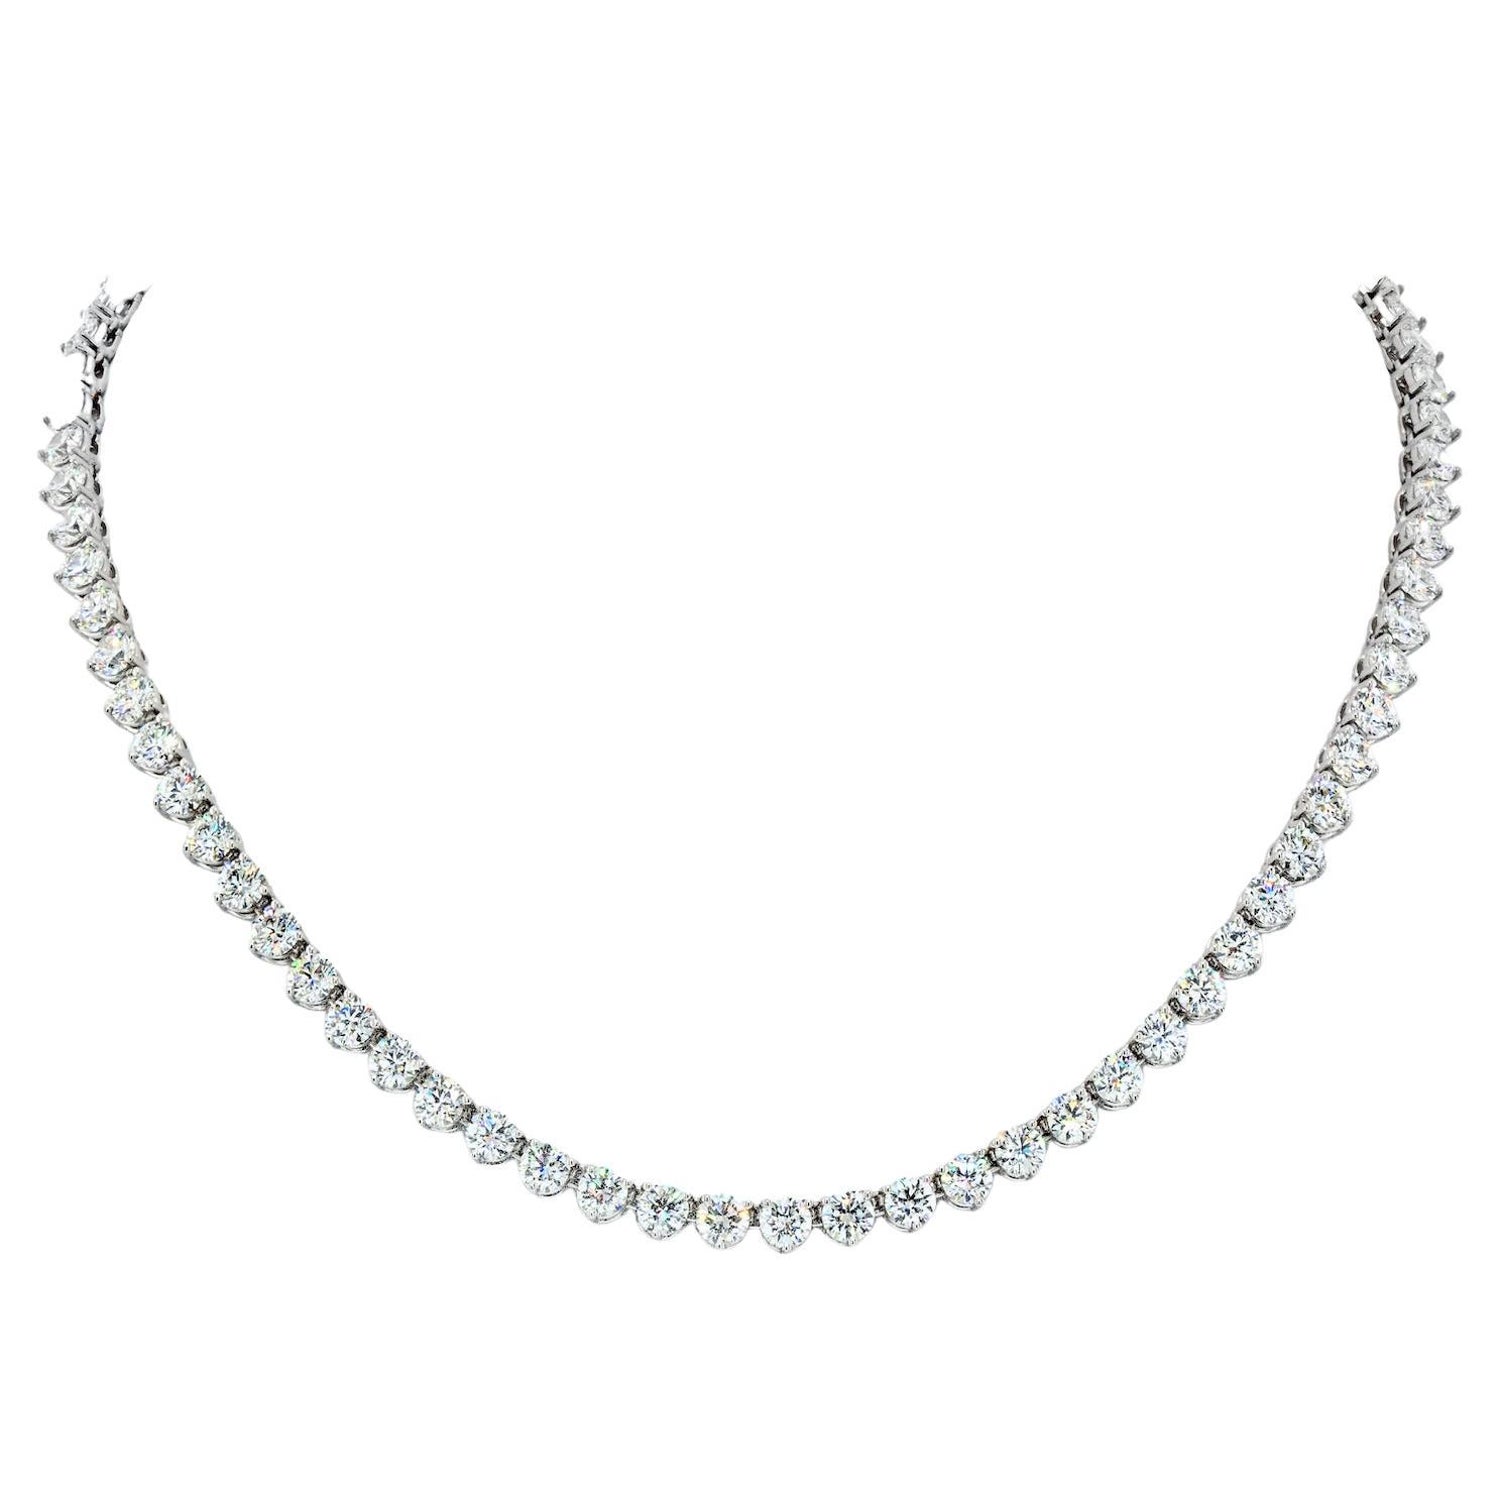 Louis Newman and Co GIA Diamond Straight Line Tennis Necklace with